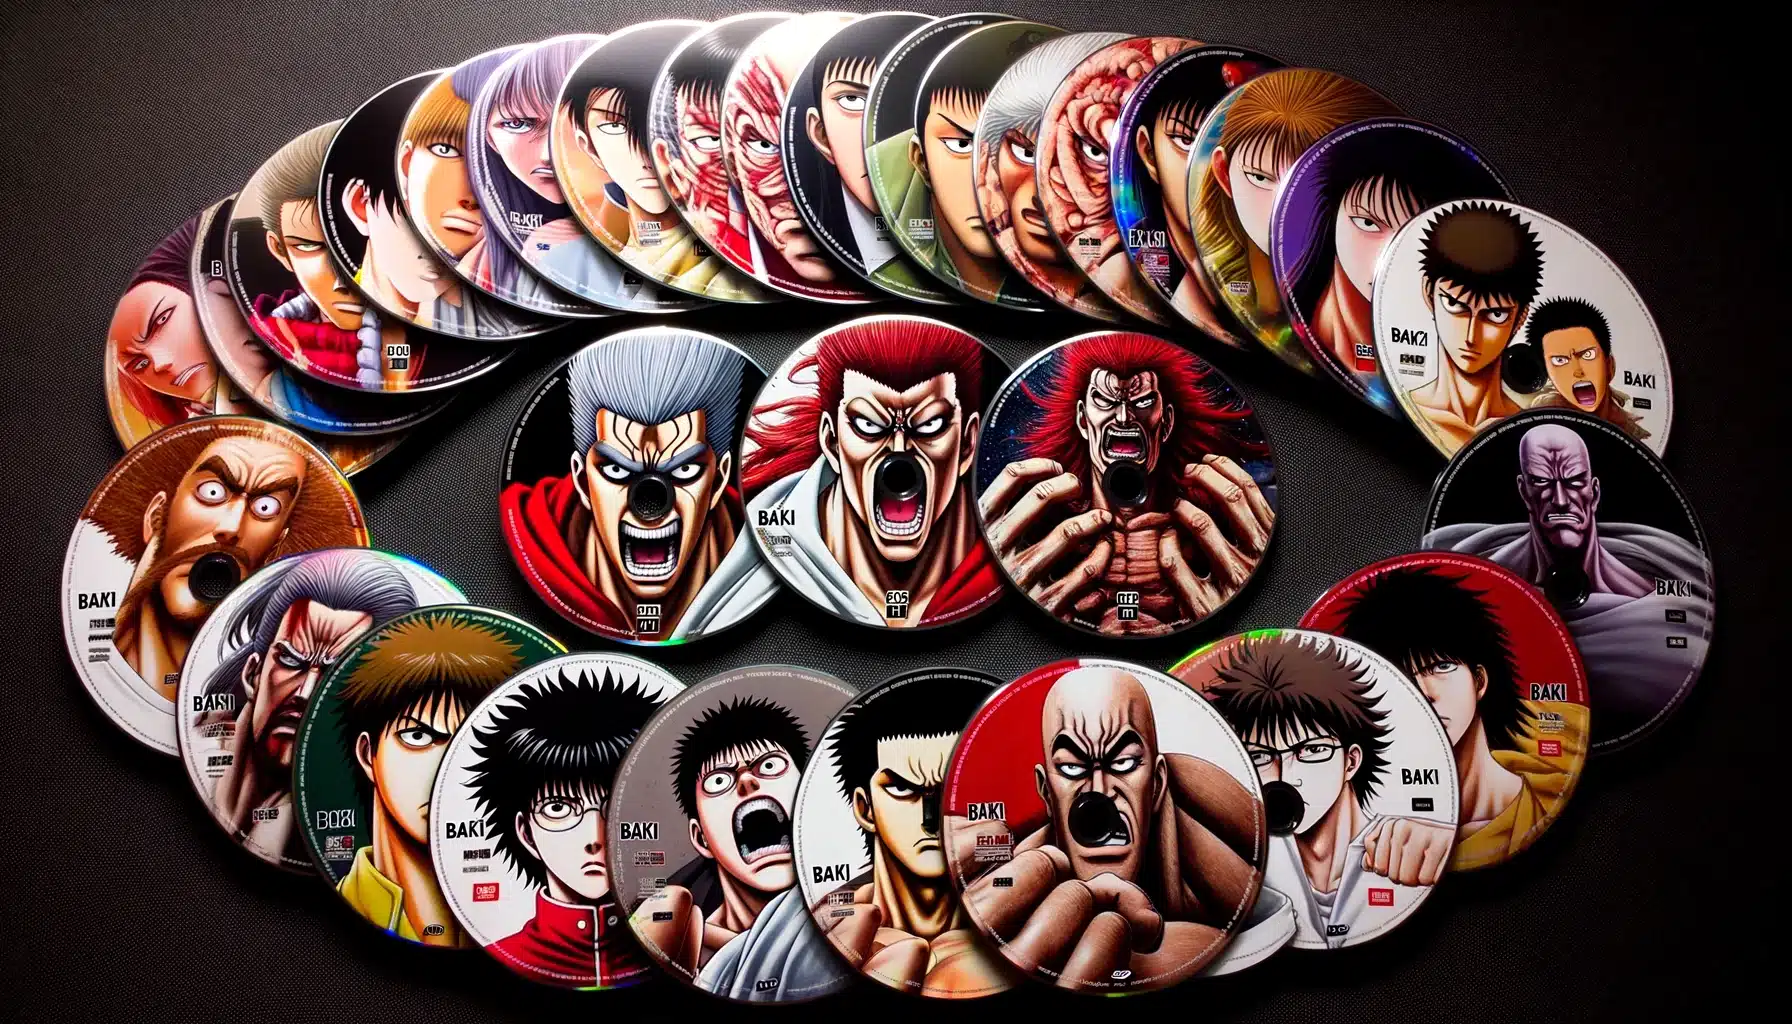 How Many Baki Anime Are There?